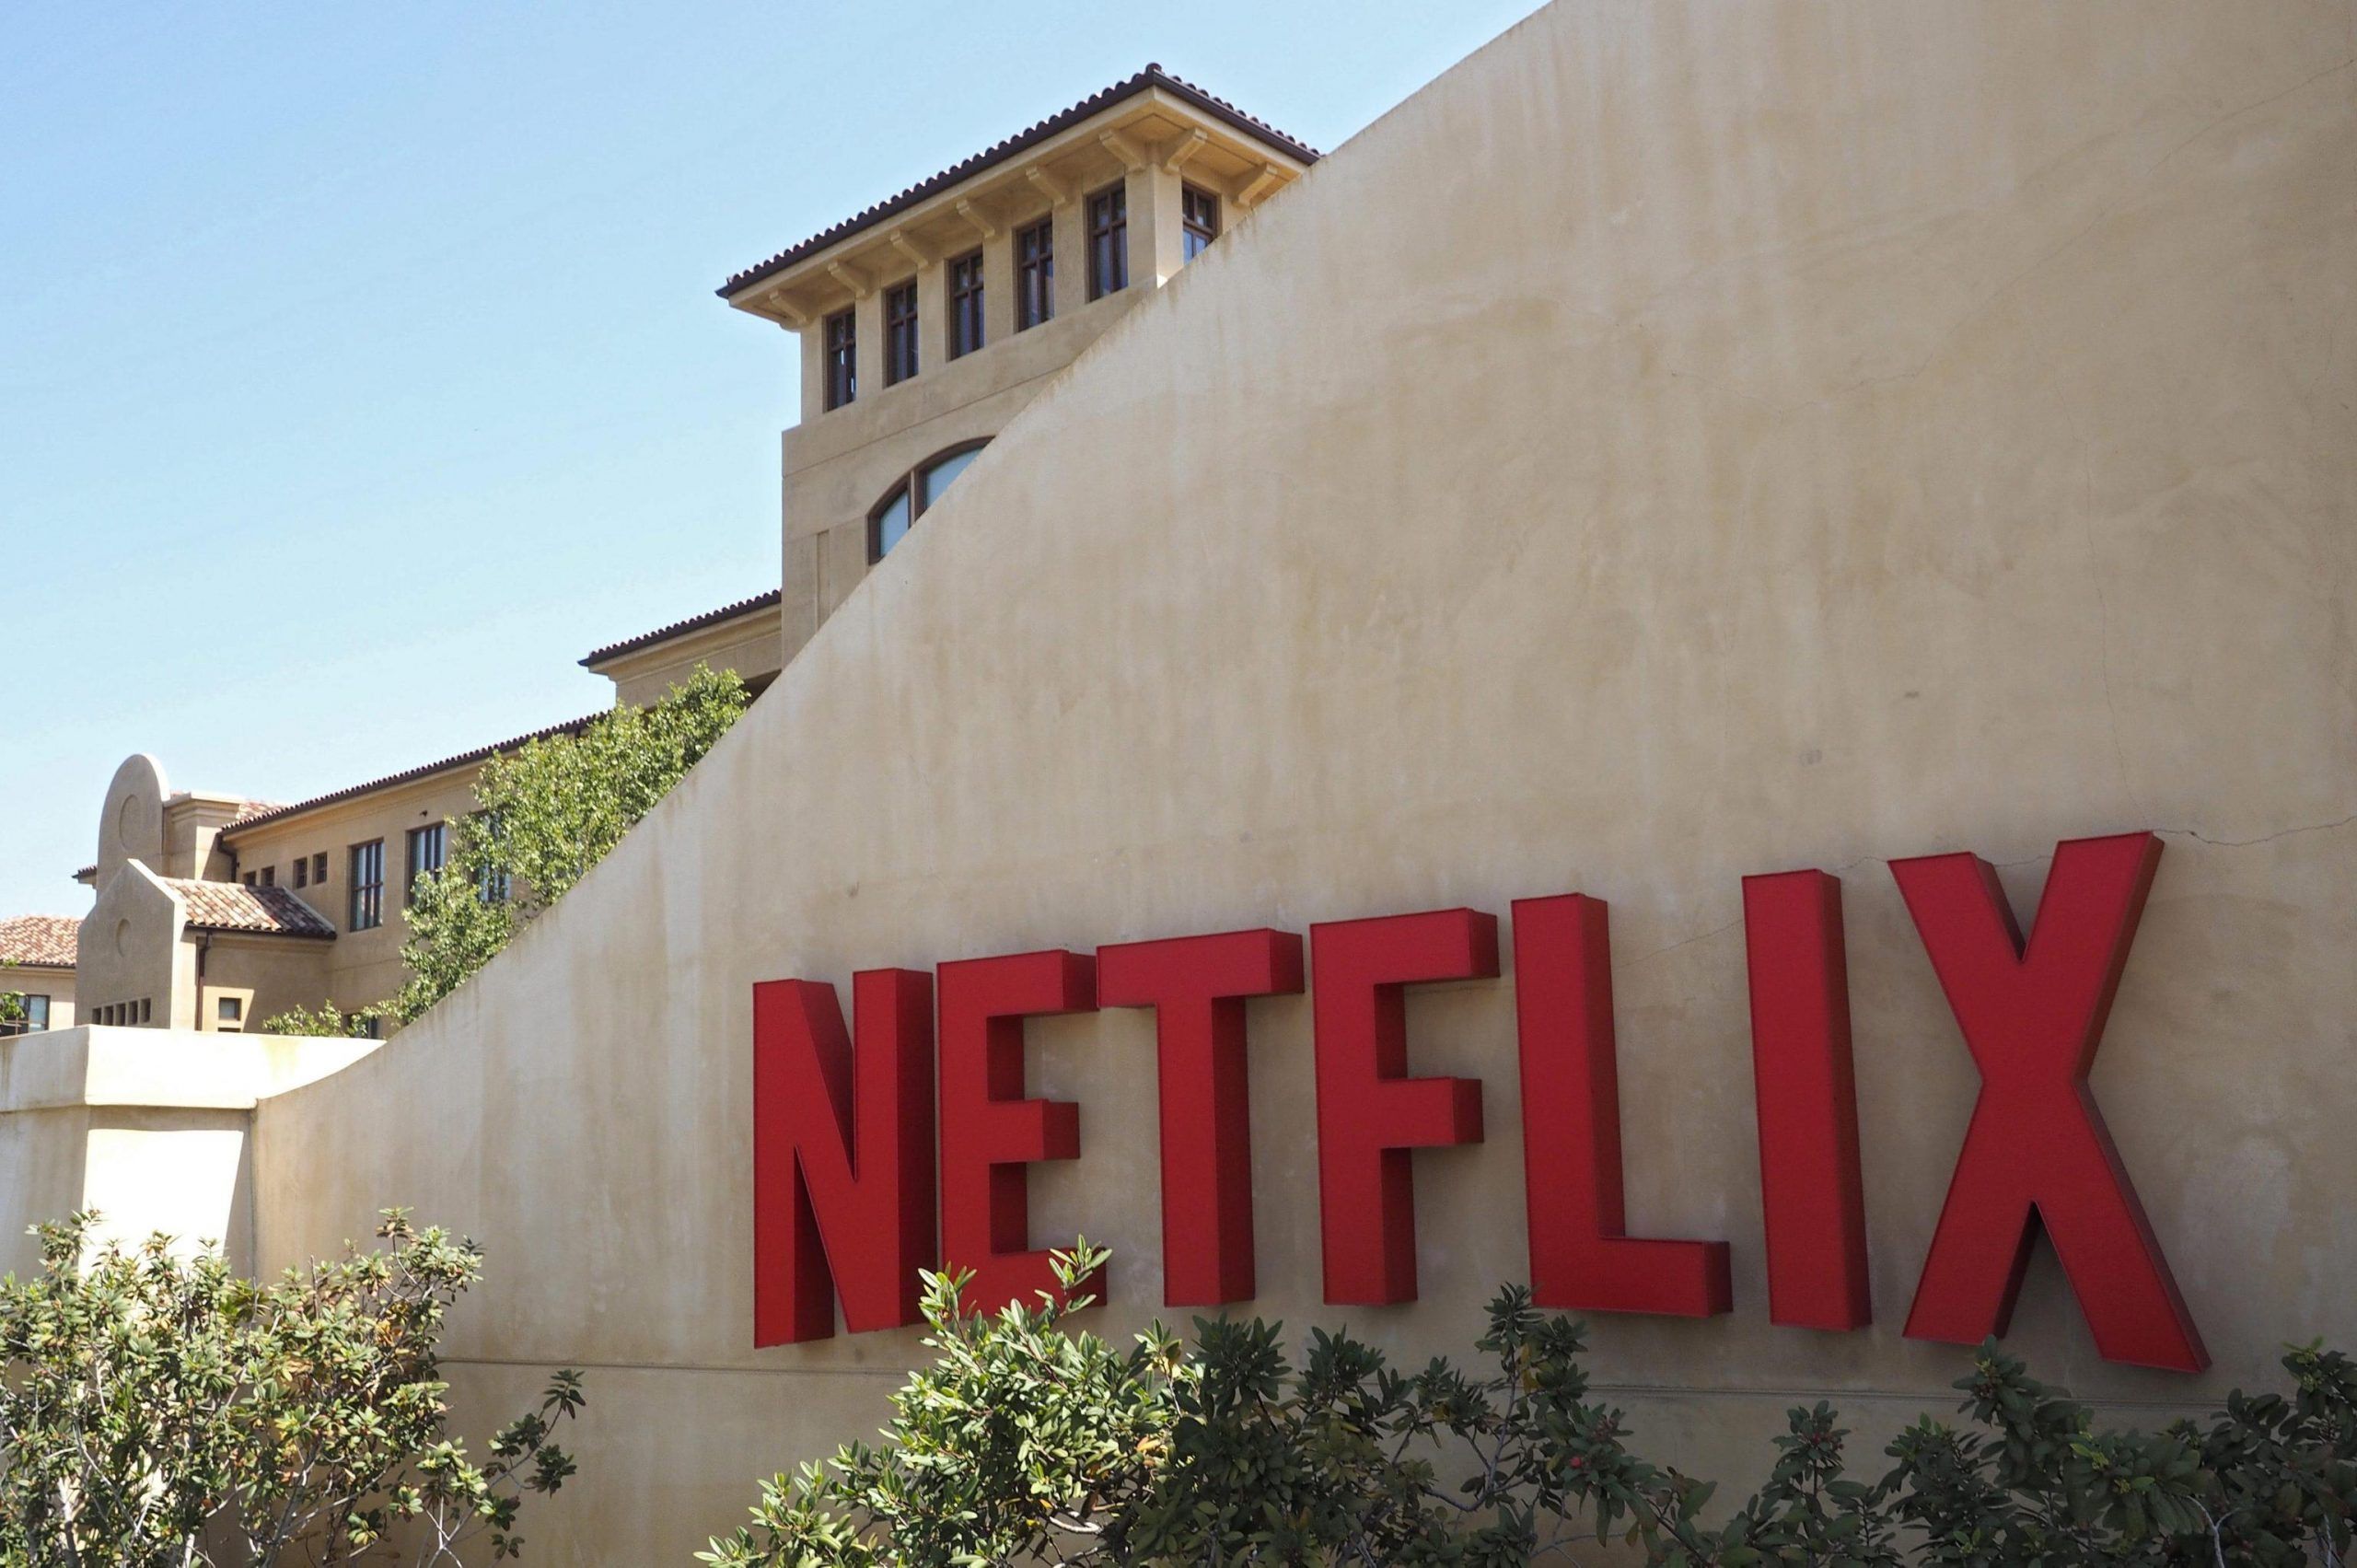 Netflix to release their 4th quarter results on 19 January 2016